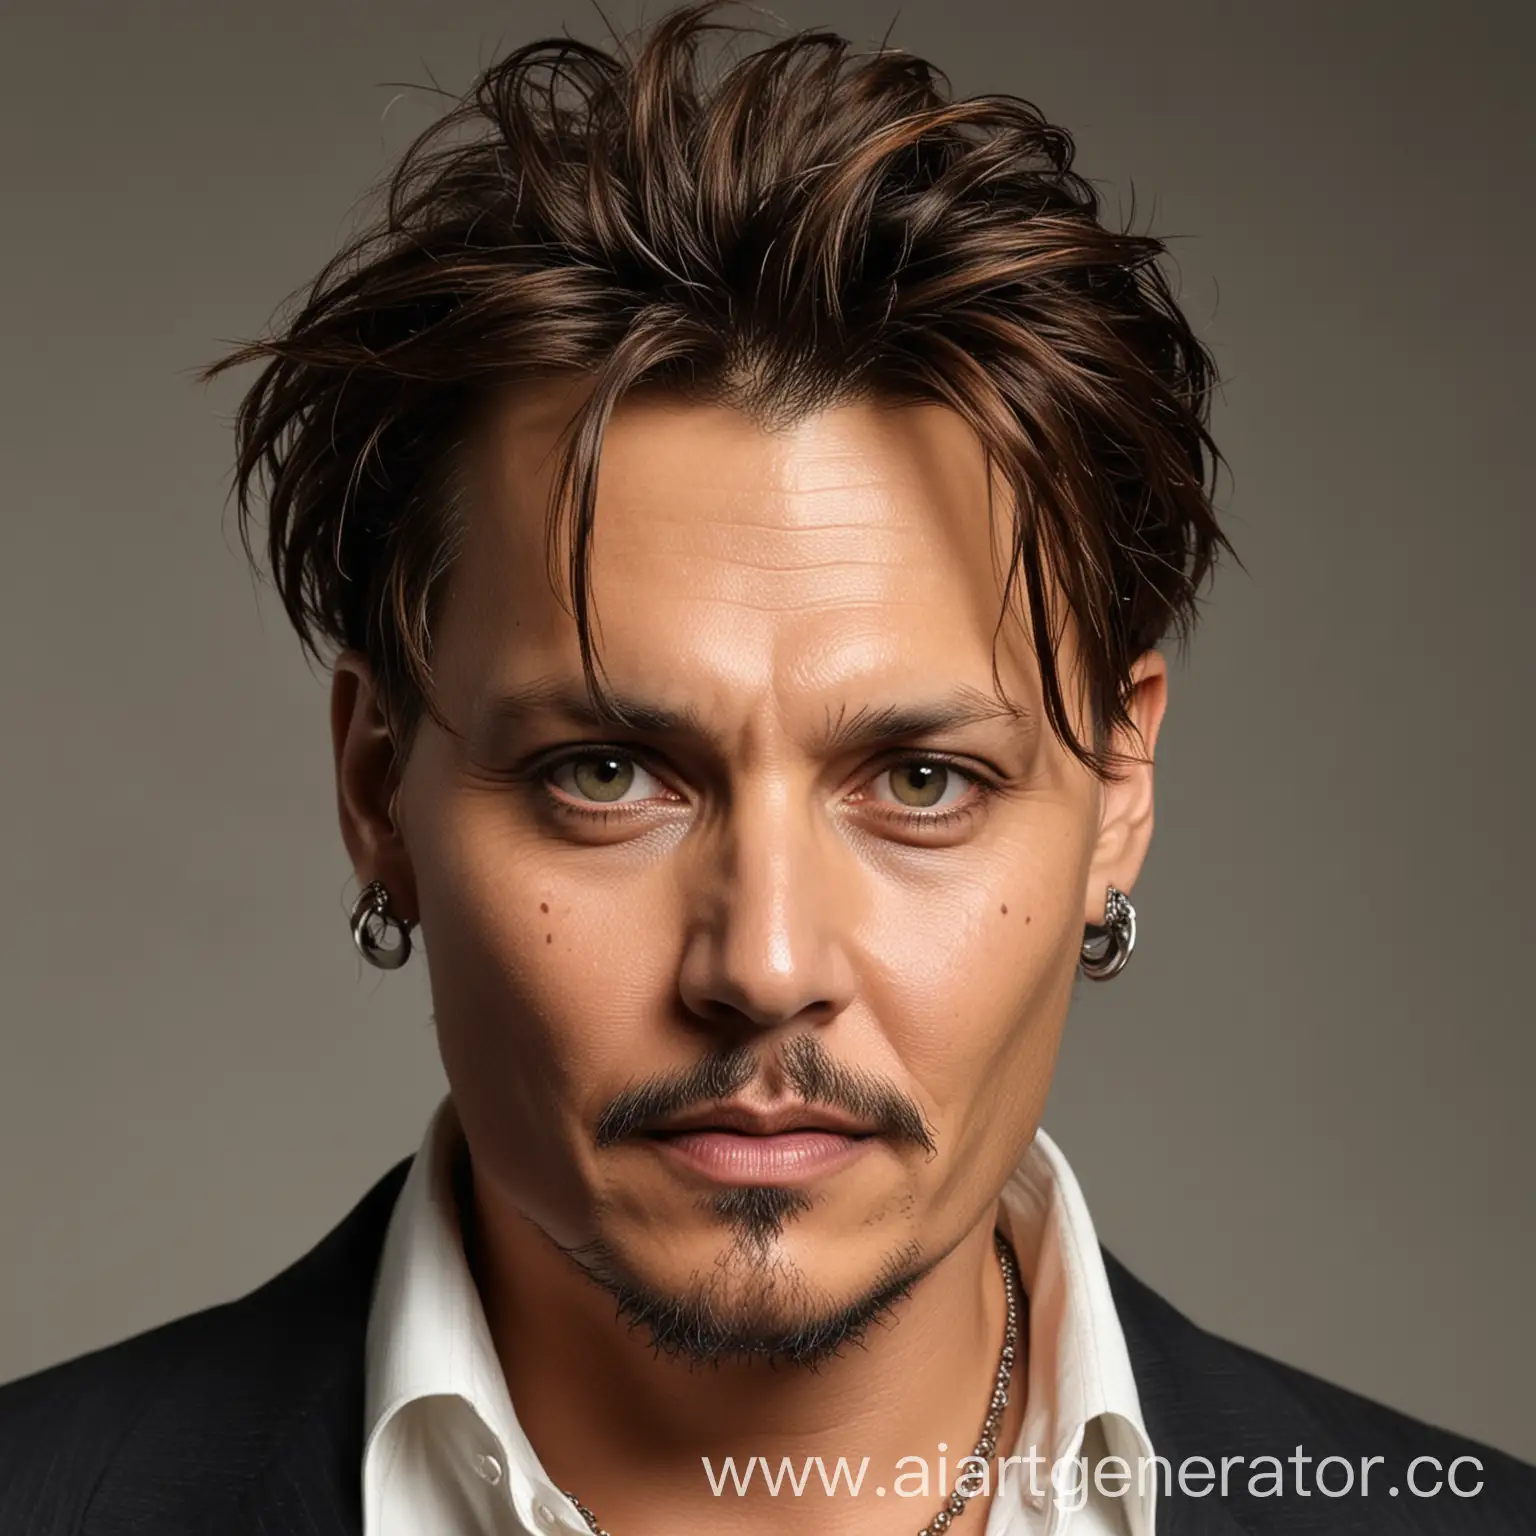 Johnny-Depp-Impersonator-Performing-Iconic-Roles-on-Stage